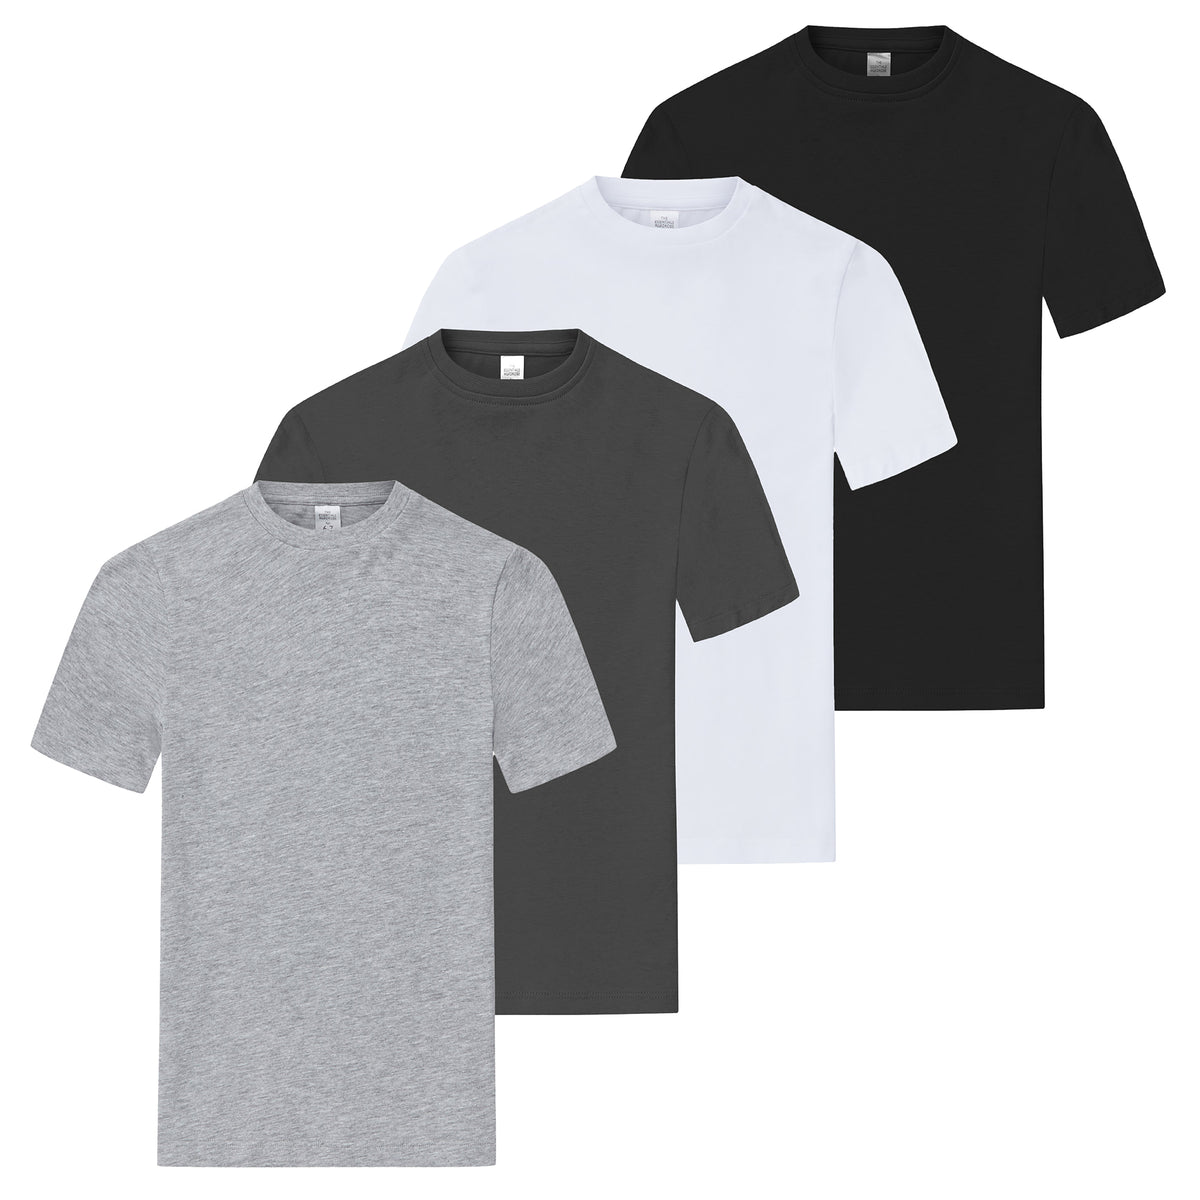 Boys 4 Pack T- Shirt Assorted 1 Younger